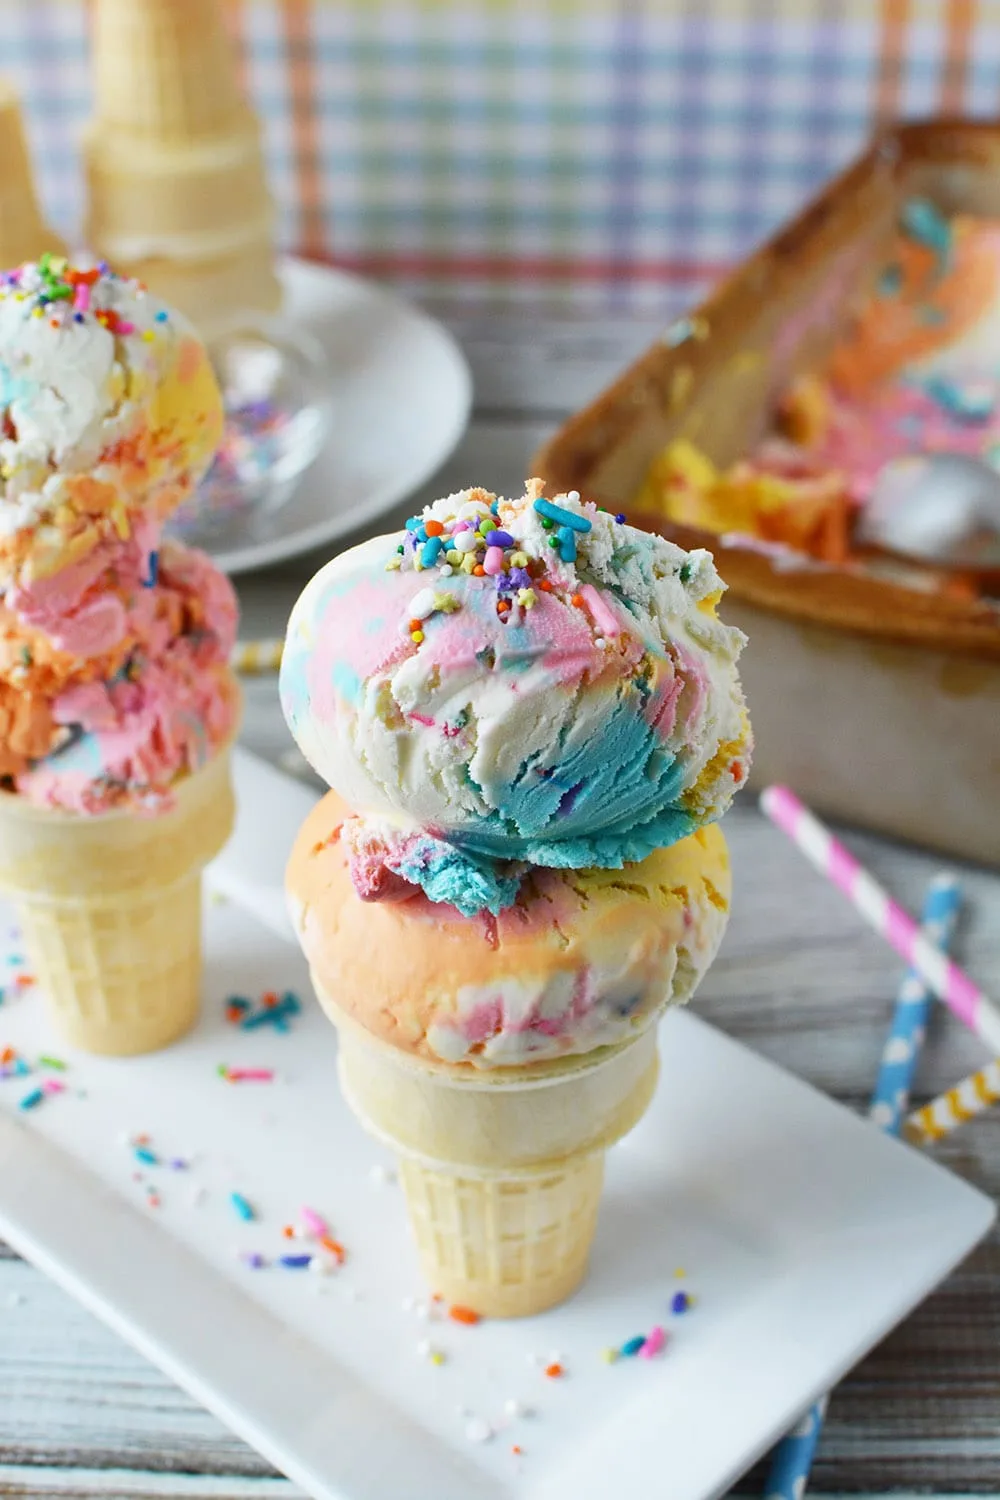 Colorful ice cream cone with sprinkles.